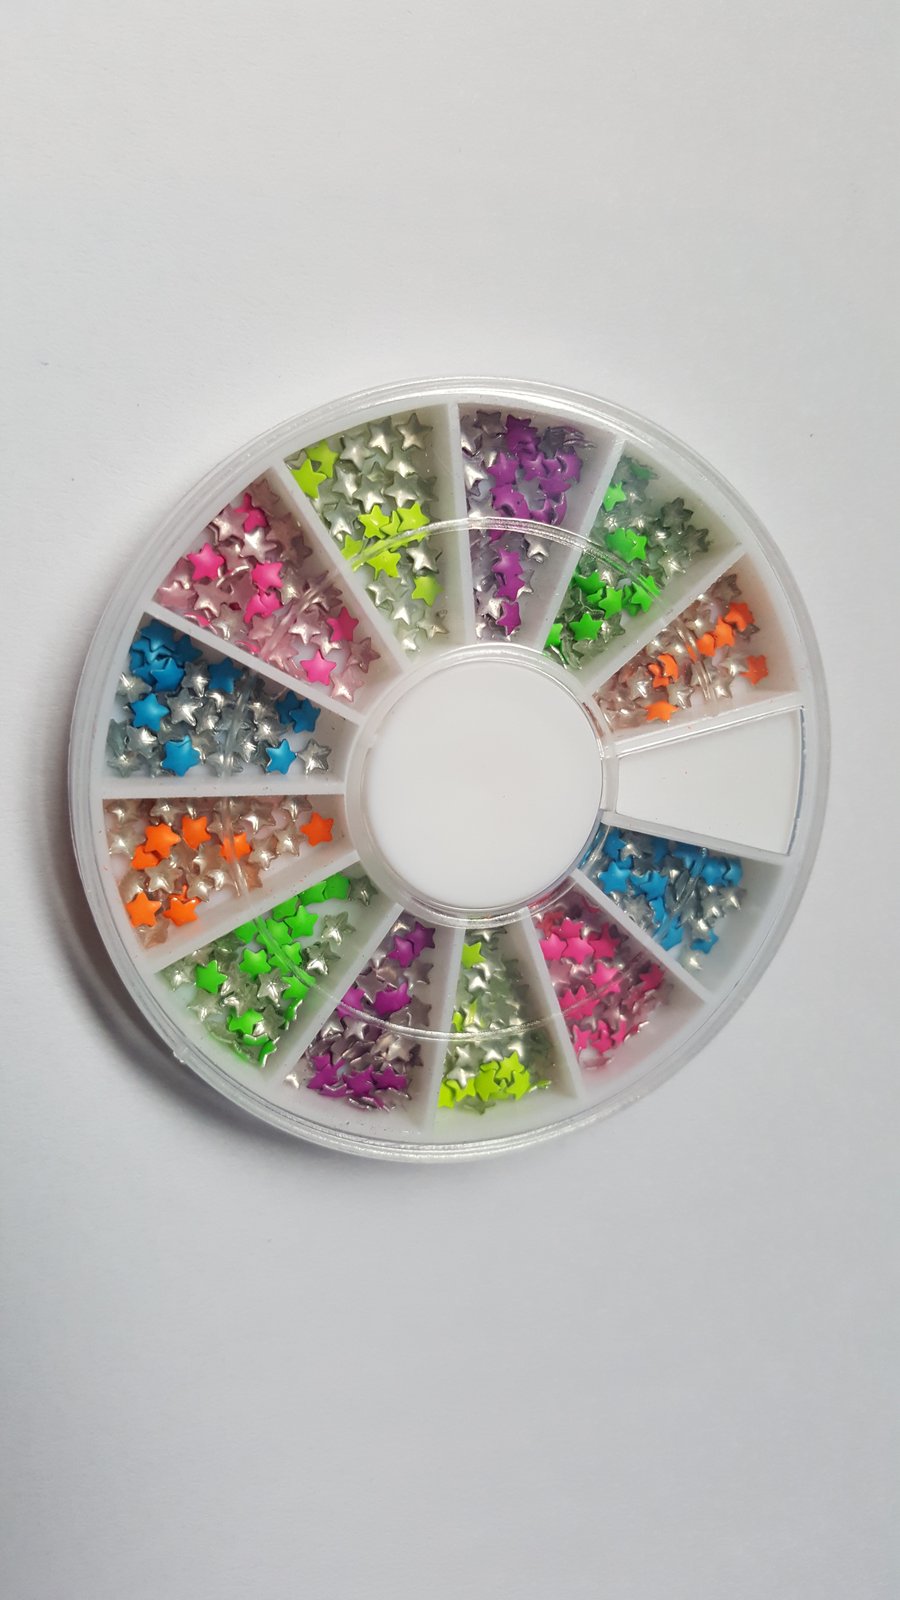 1 x Filled Storage Wheel - 6cm - 3mm Star Studs - Mixed Colour 